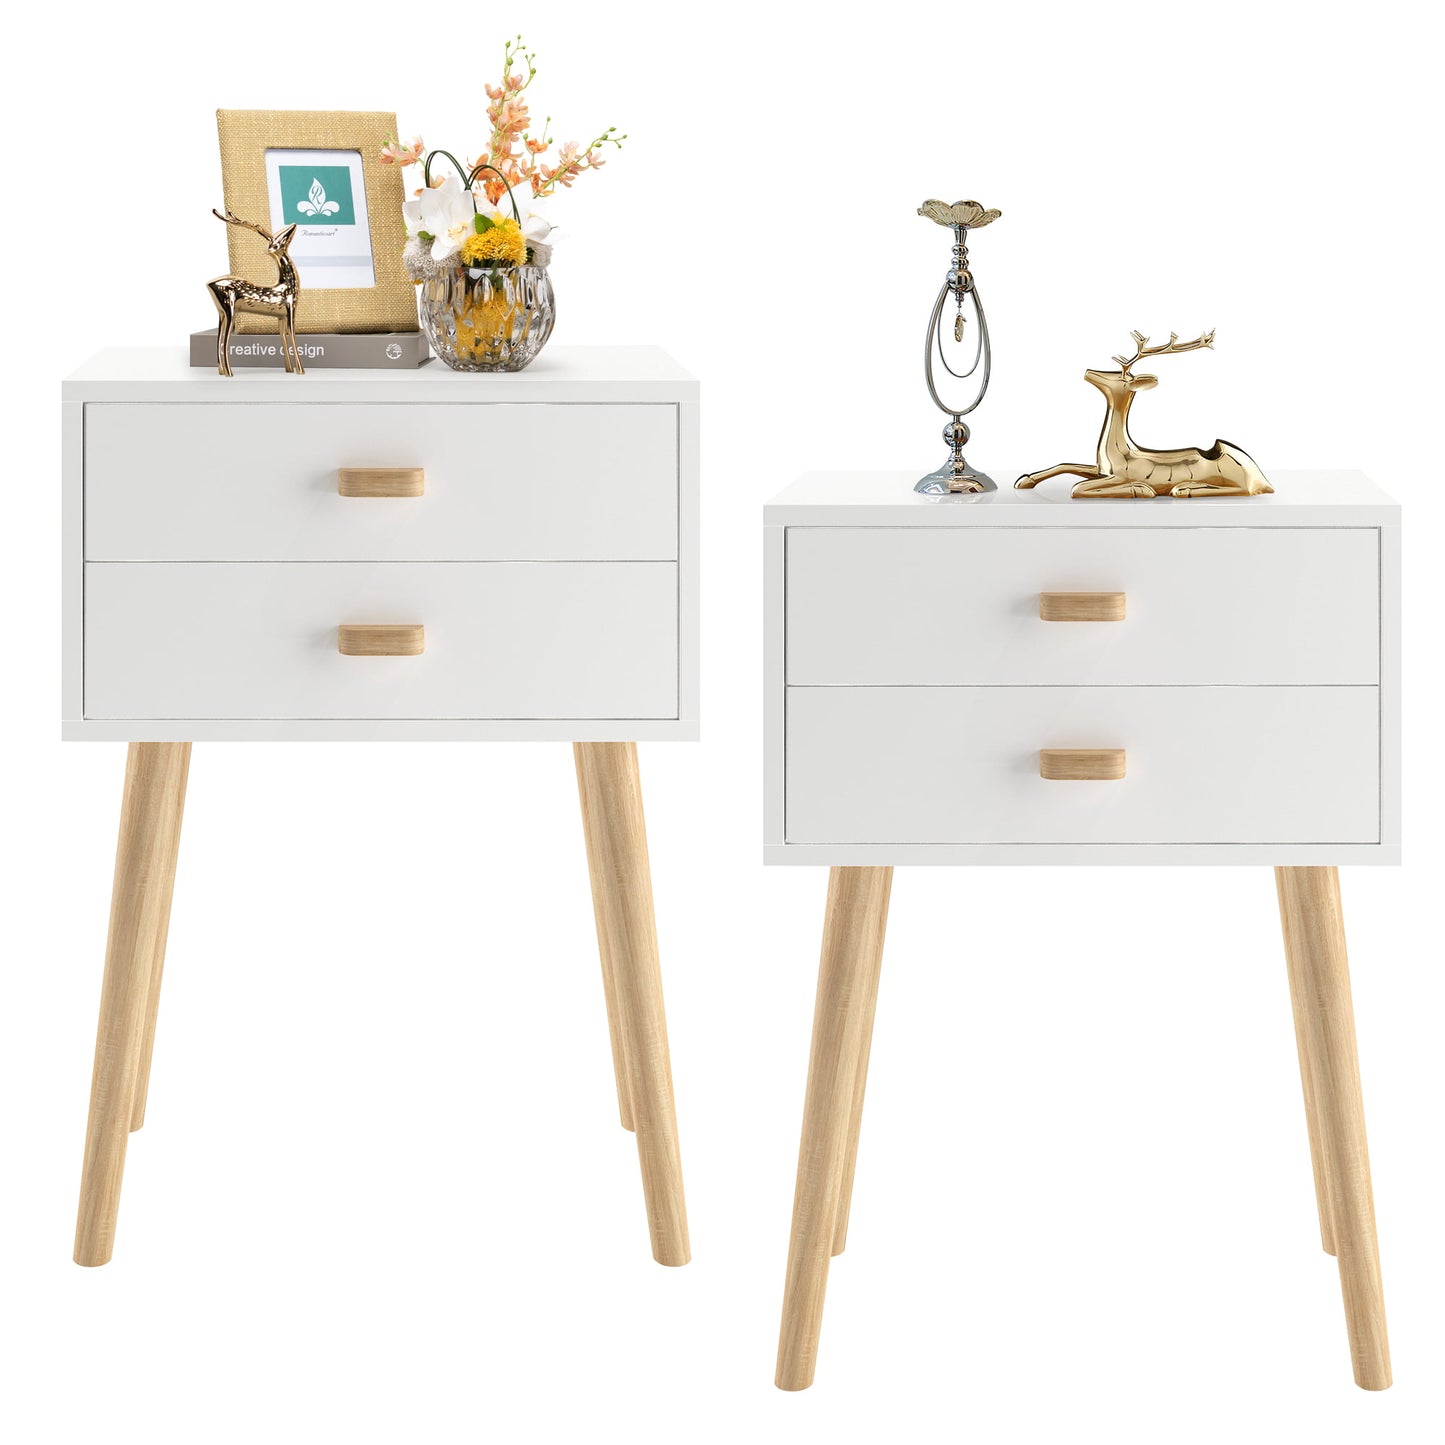 Syngar Nightstand Set of 2, Bedroom Bedside Table with 2 Drawer Storage Shelf, Simple Modern Night Stand End Table with Wood Handle, Easy assembly, Suitable for Living Room Bedroom Furniture, White